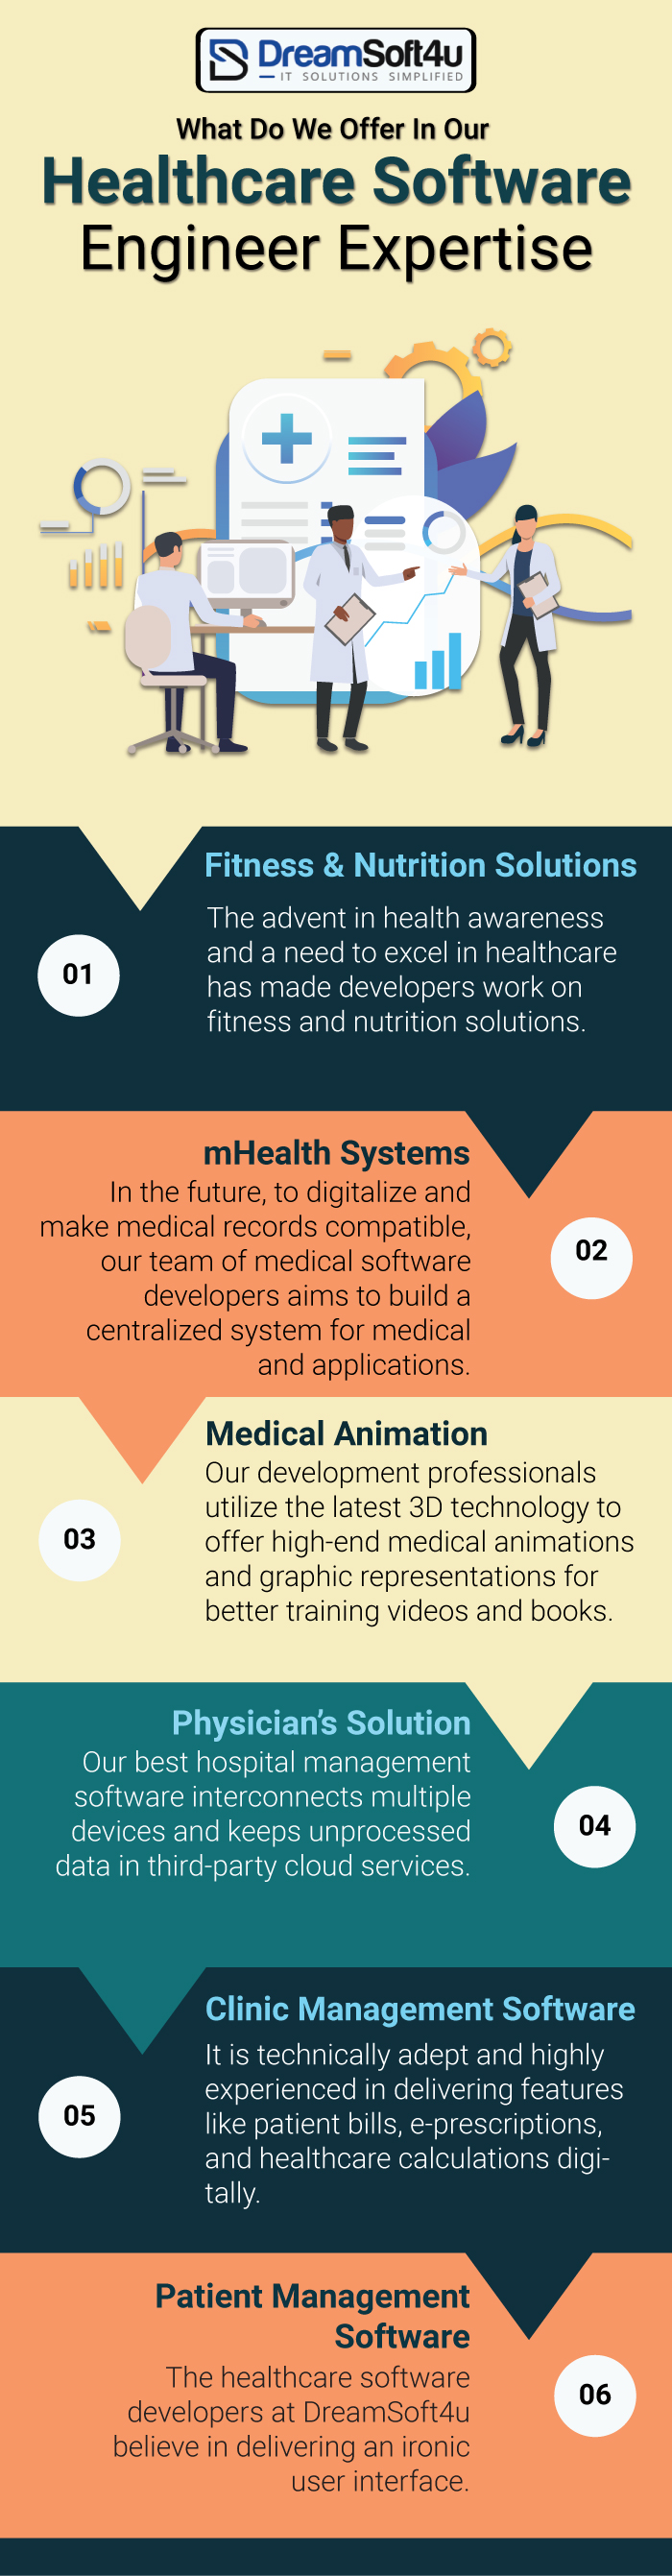 What Do We Offer In Our Healthcare Software Engineer Expertise?